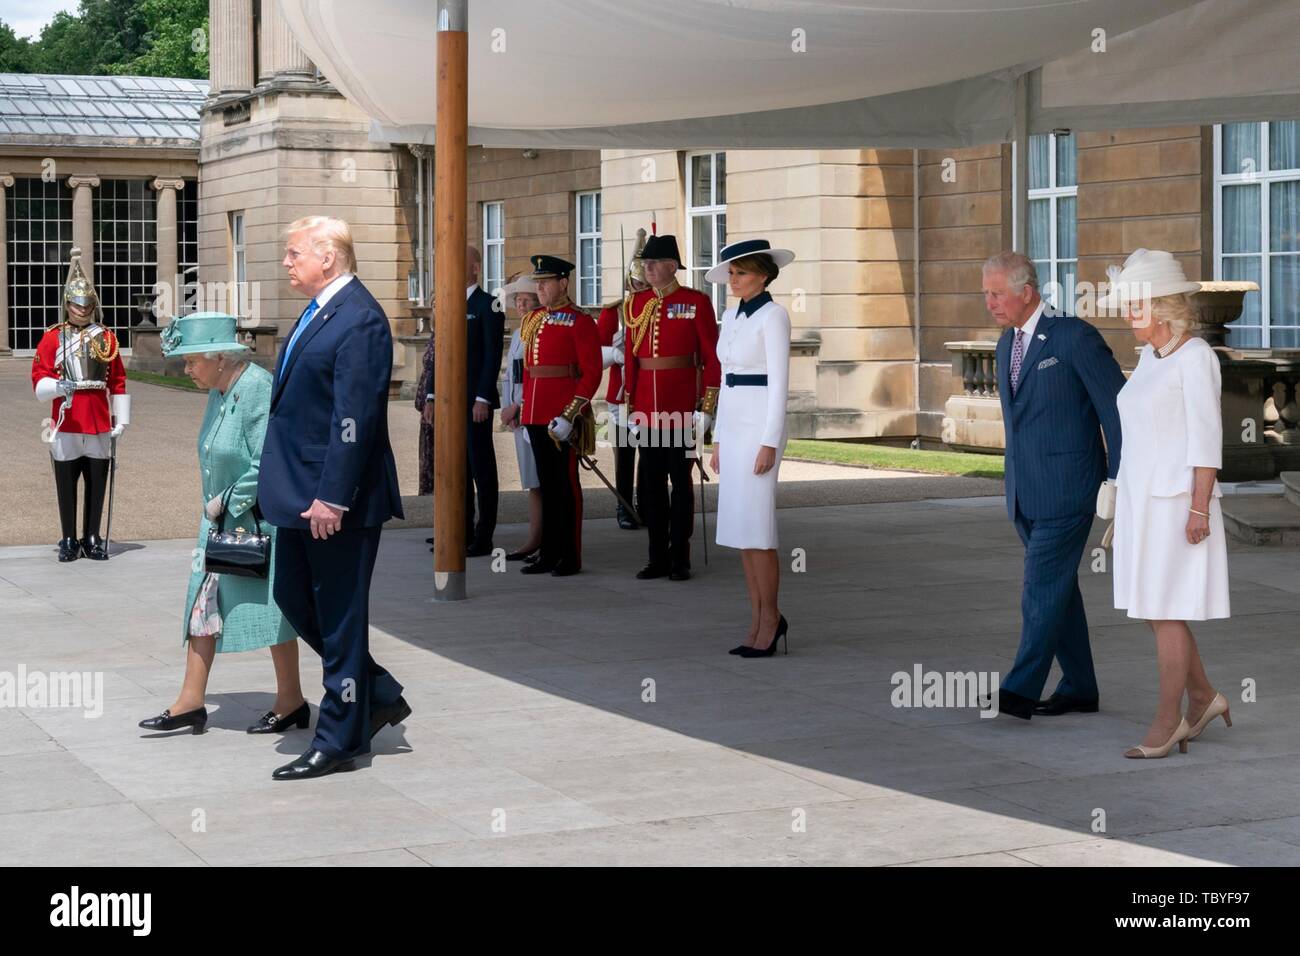 London, UK. 03rd June, 2019. U.S President Donald Trump, walks with Queen Elizabeth II as Prince Charles and the Duchess of Cornwall follow during the official welcoming ceremony at Buckingham Palace June 3, 2019 in London, England. Credit: Planetpix/Alamy Live News Stock Photo